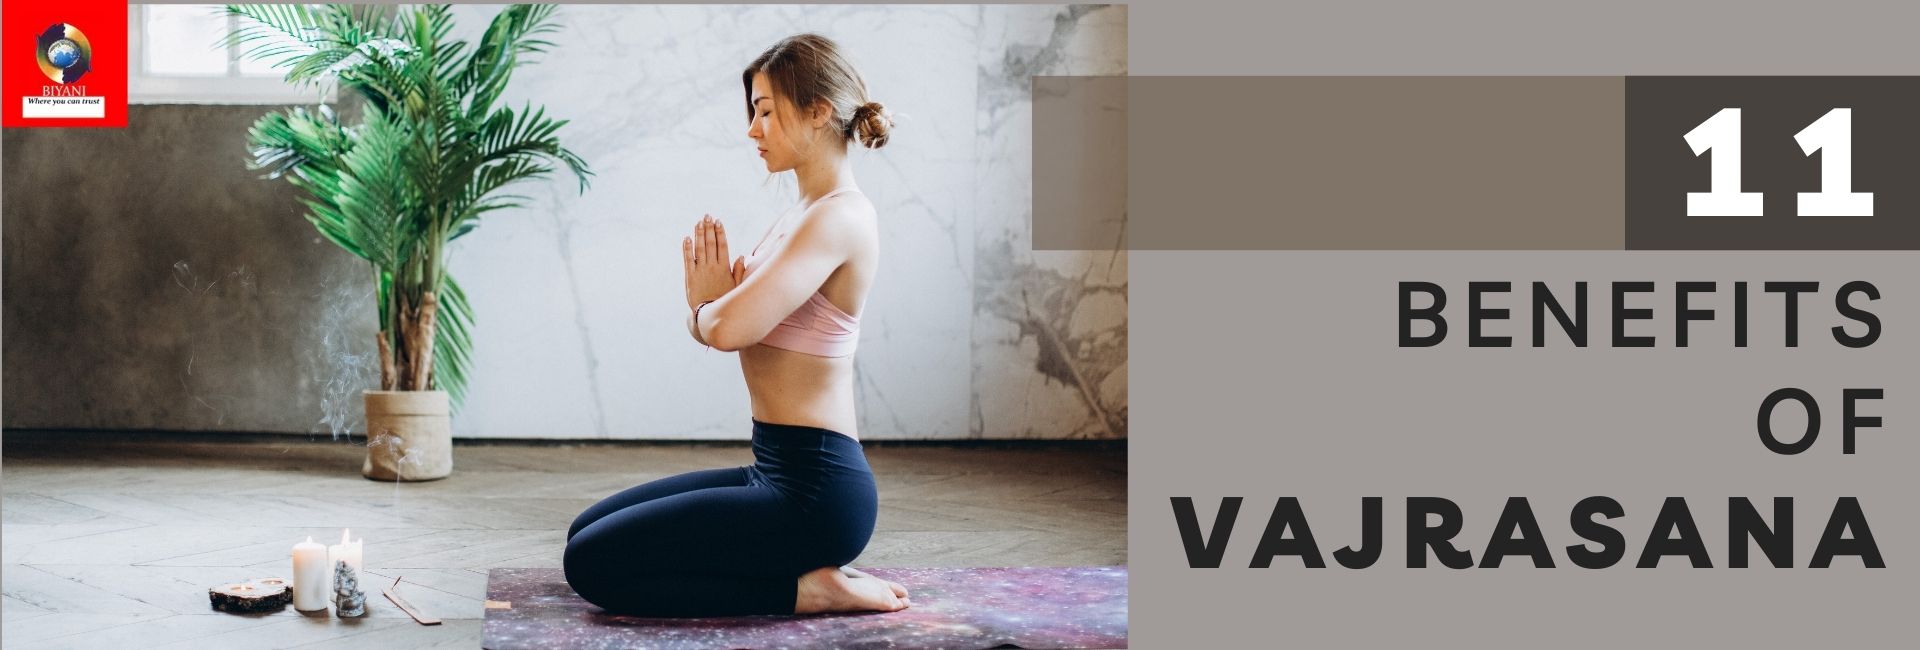 Vajrasana Yoga: How To Do It And What Are Its Benefits? | Begginers yoga,  Yoga lessons, Yoga benefits